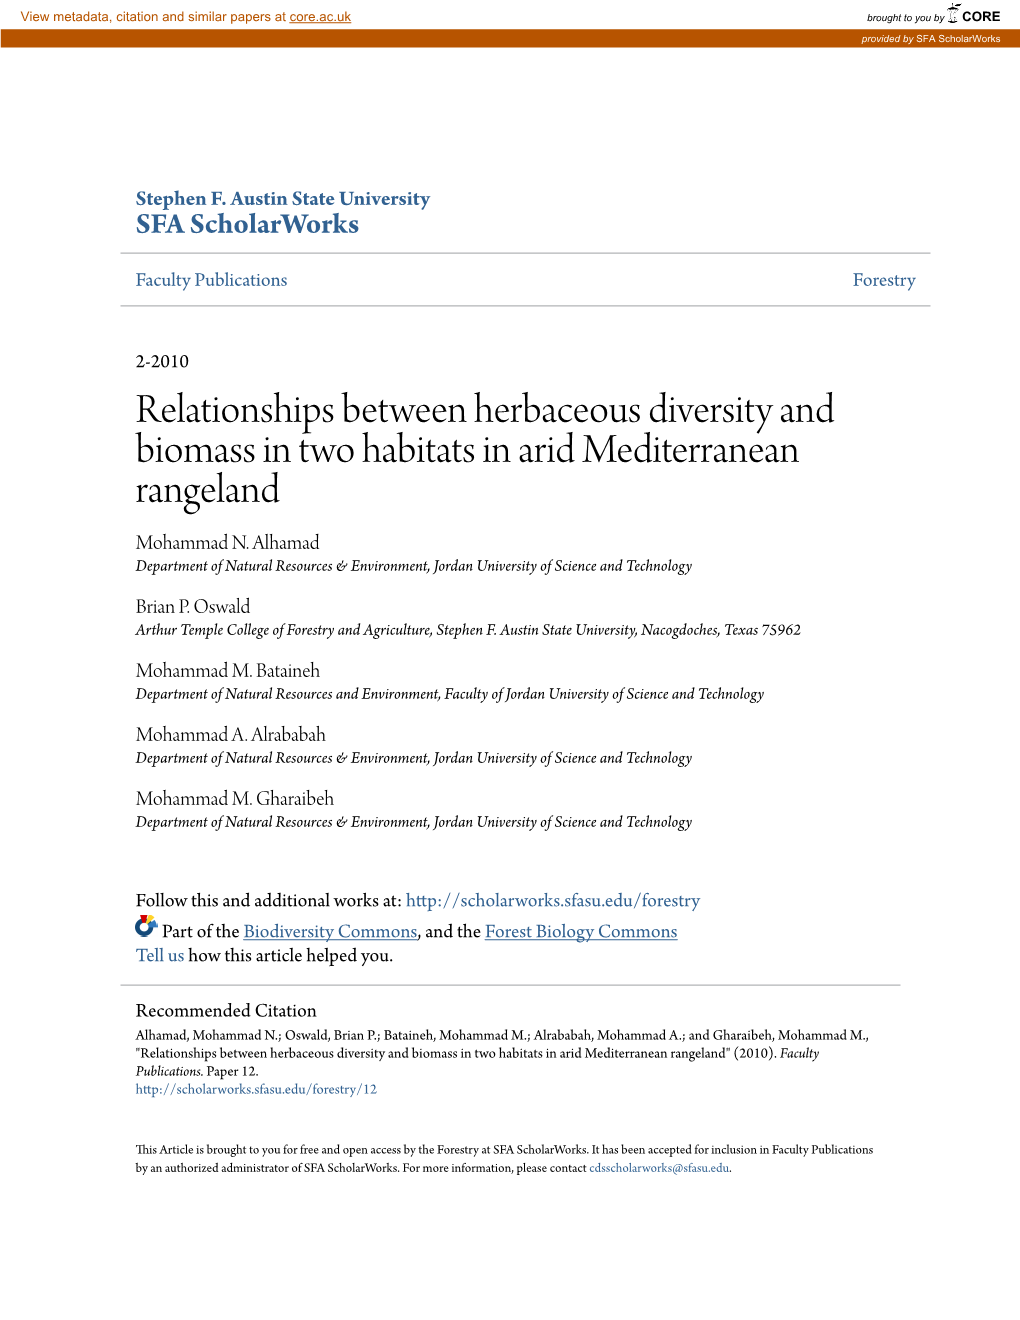 Relationships Between Herbaceous Diversity and Biomass in Two Habitats in Arid Mediterranean Rangeland Mohammad N